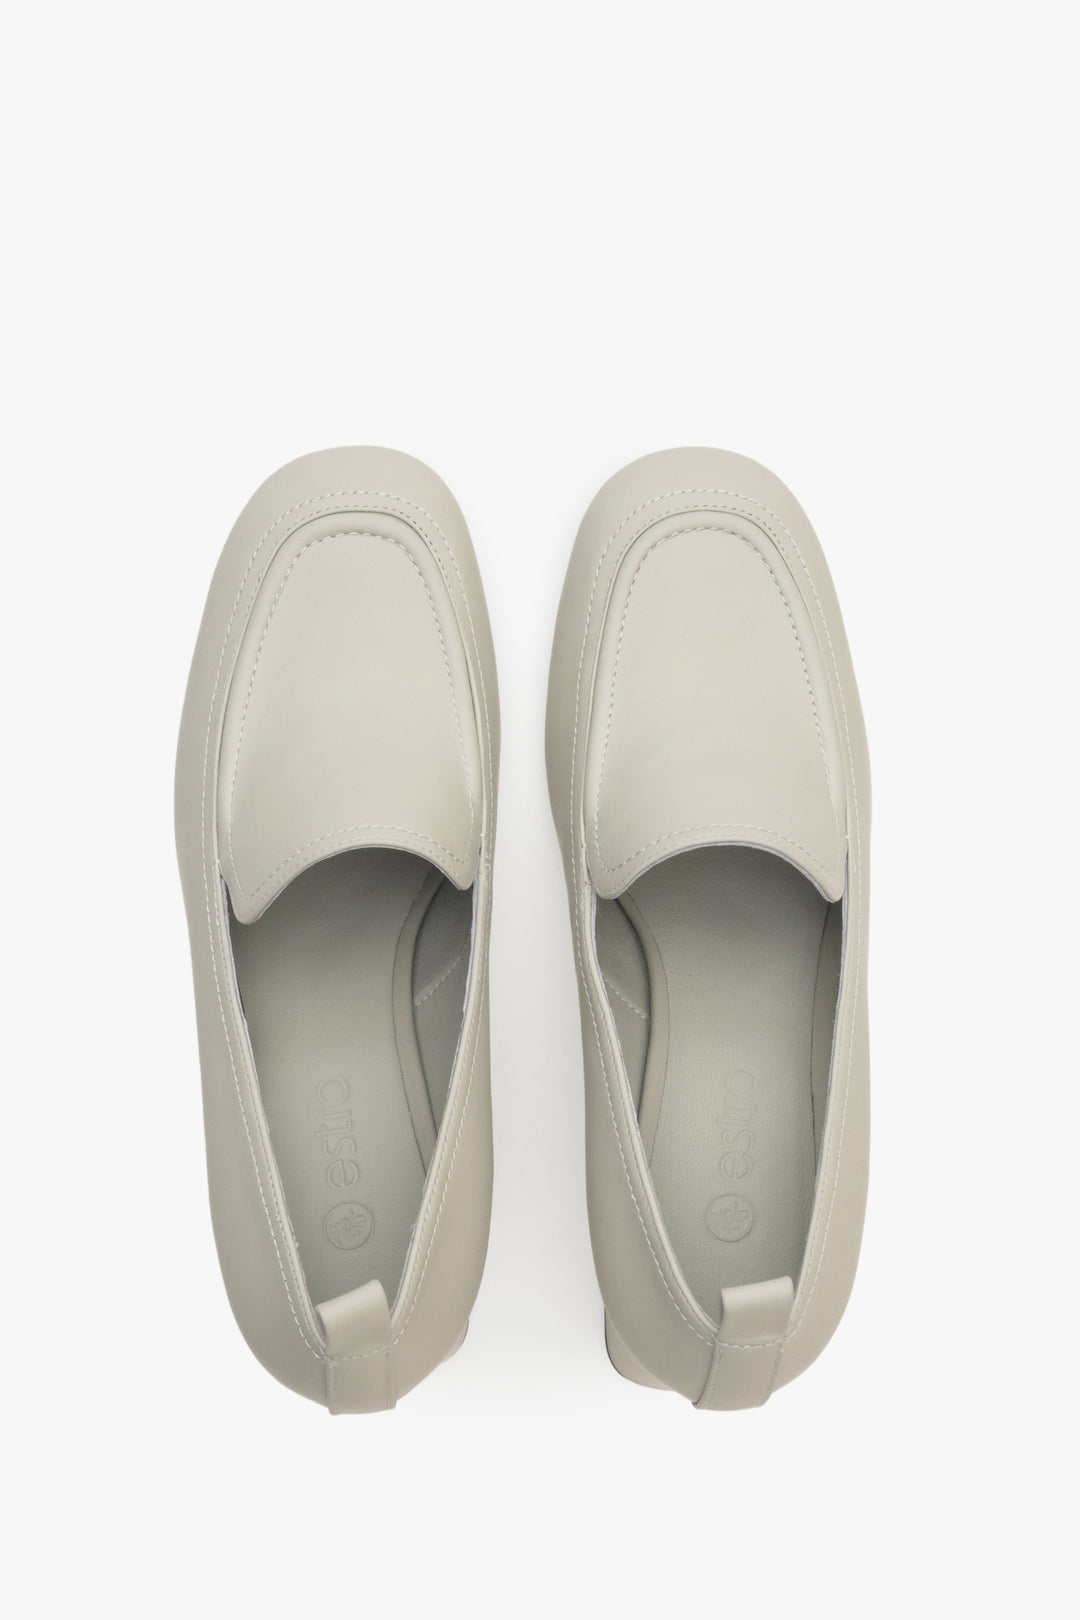 Women's stylish loafers in light beigeEstro - presentation from above.